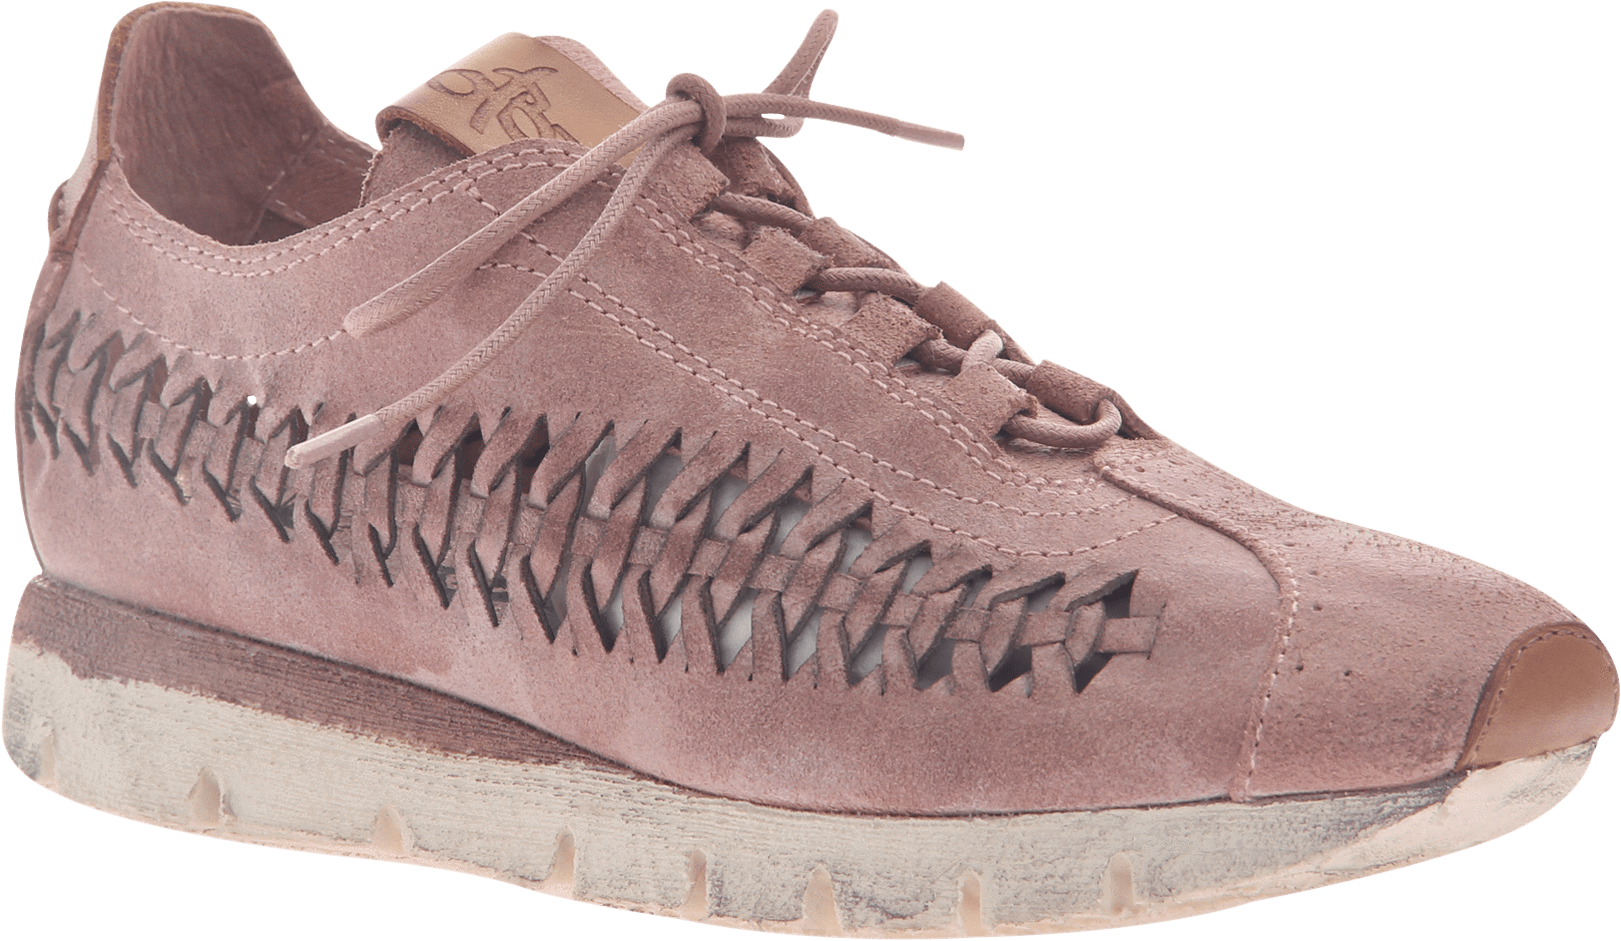 Mauve Suede Sneakerwith Unique Side Stitching.png PNG image